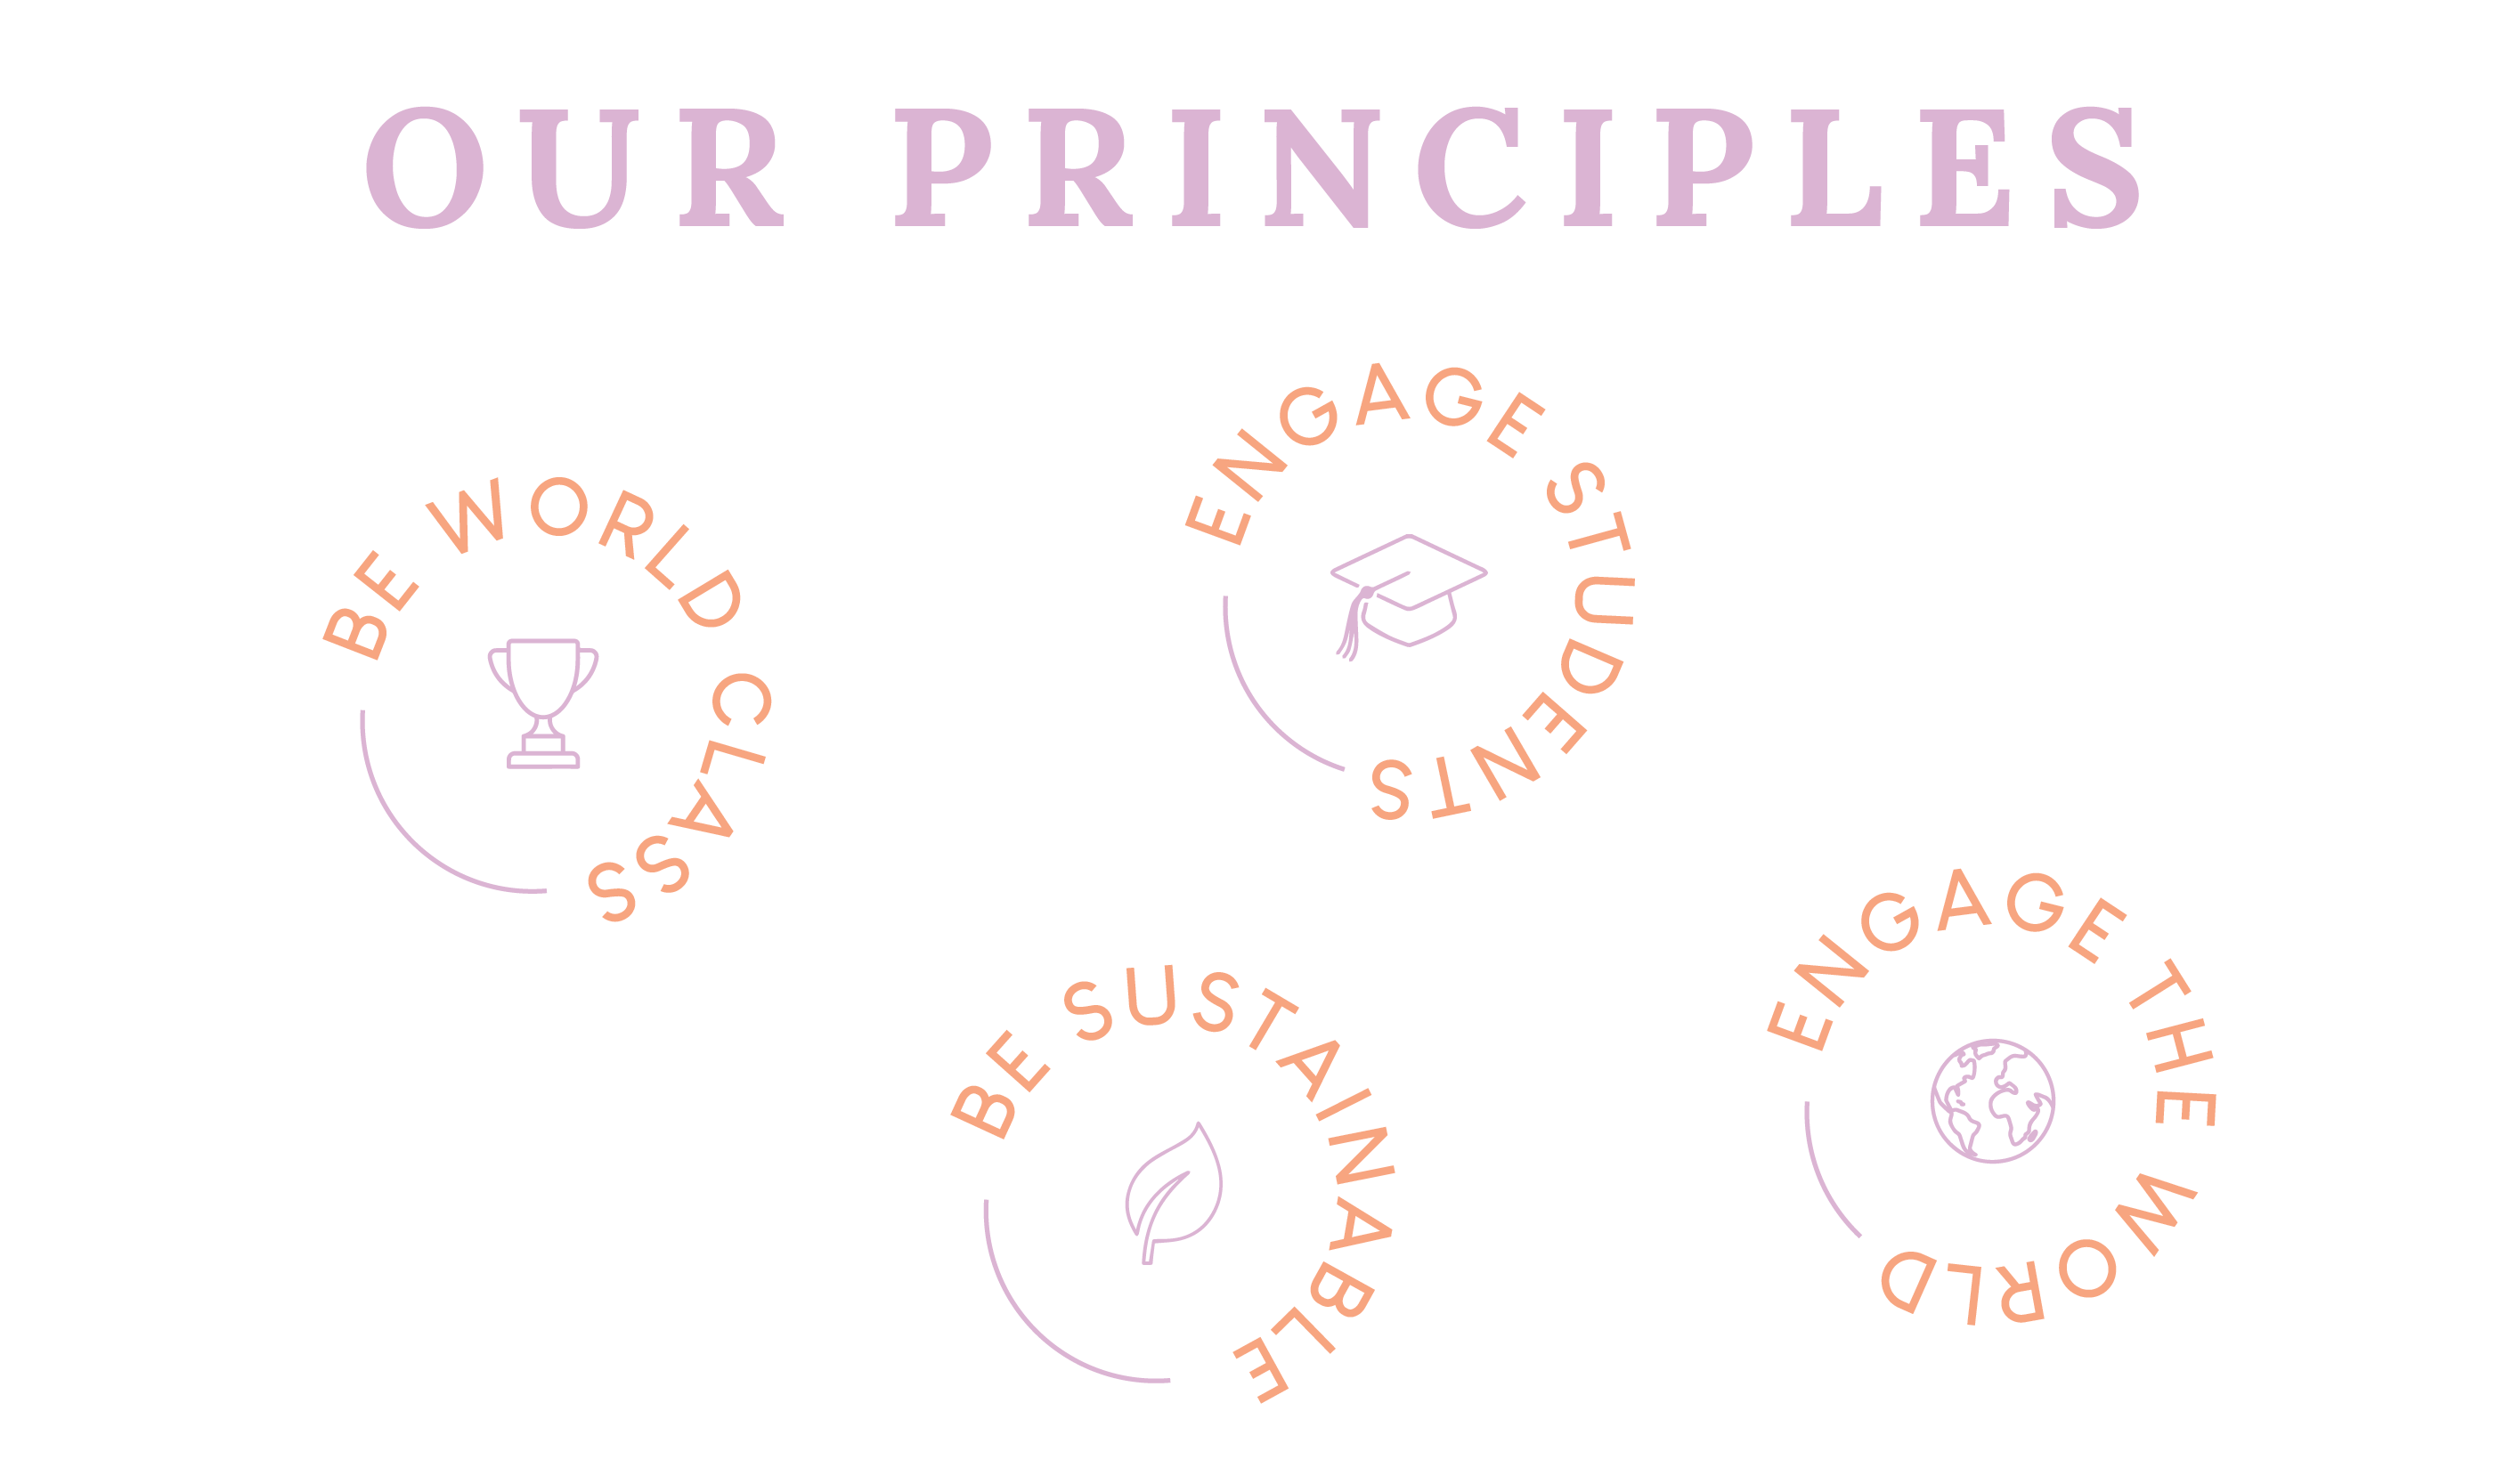 our principles - be world class, engage students, be sustainable, engage the world